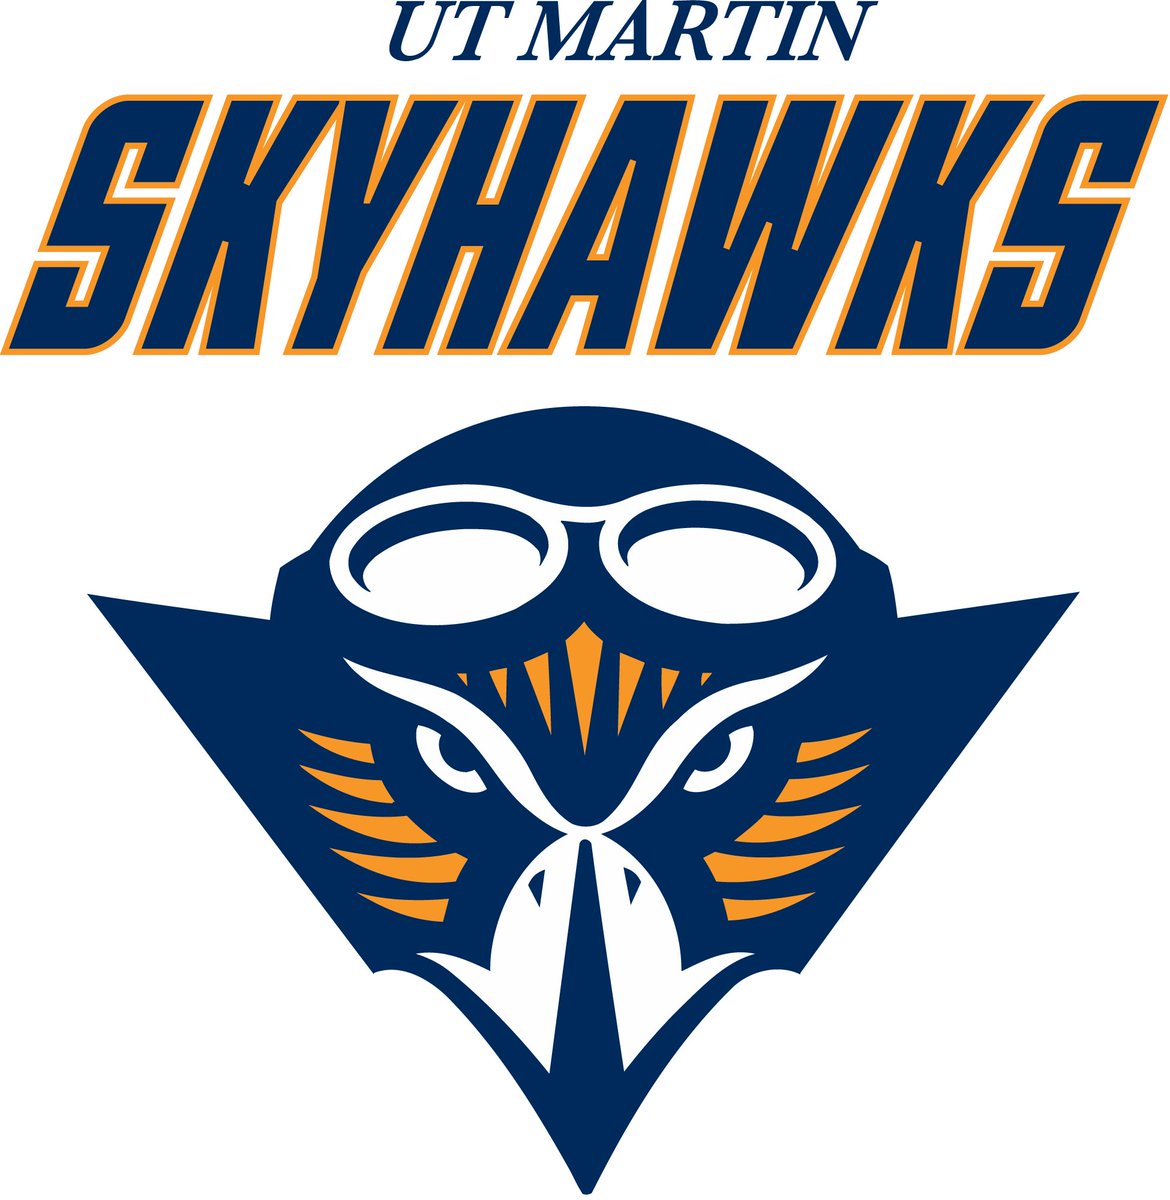 After a Great phone call with @Coach_JSimpson I’m truly blessed to receive an offer from The University of Tennessee Martin! #GoSkyhawks